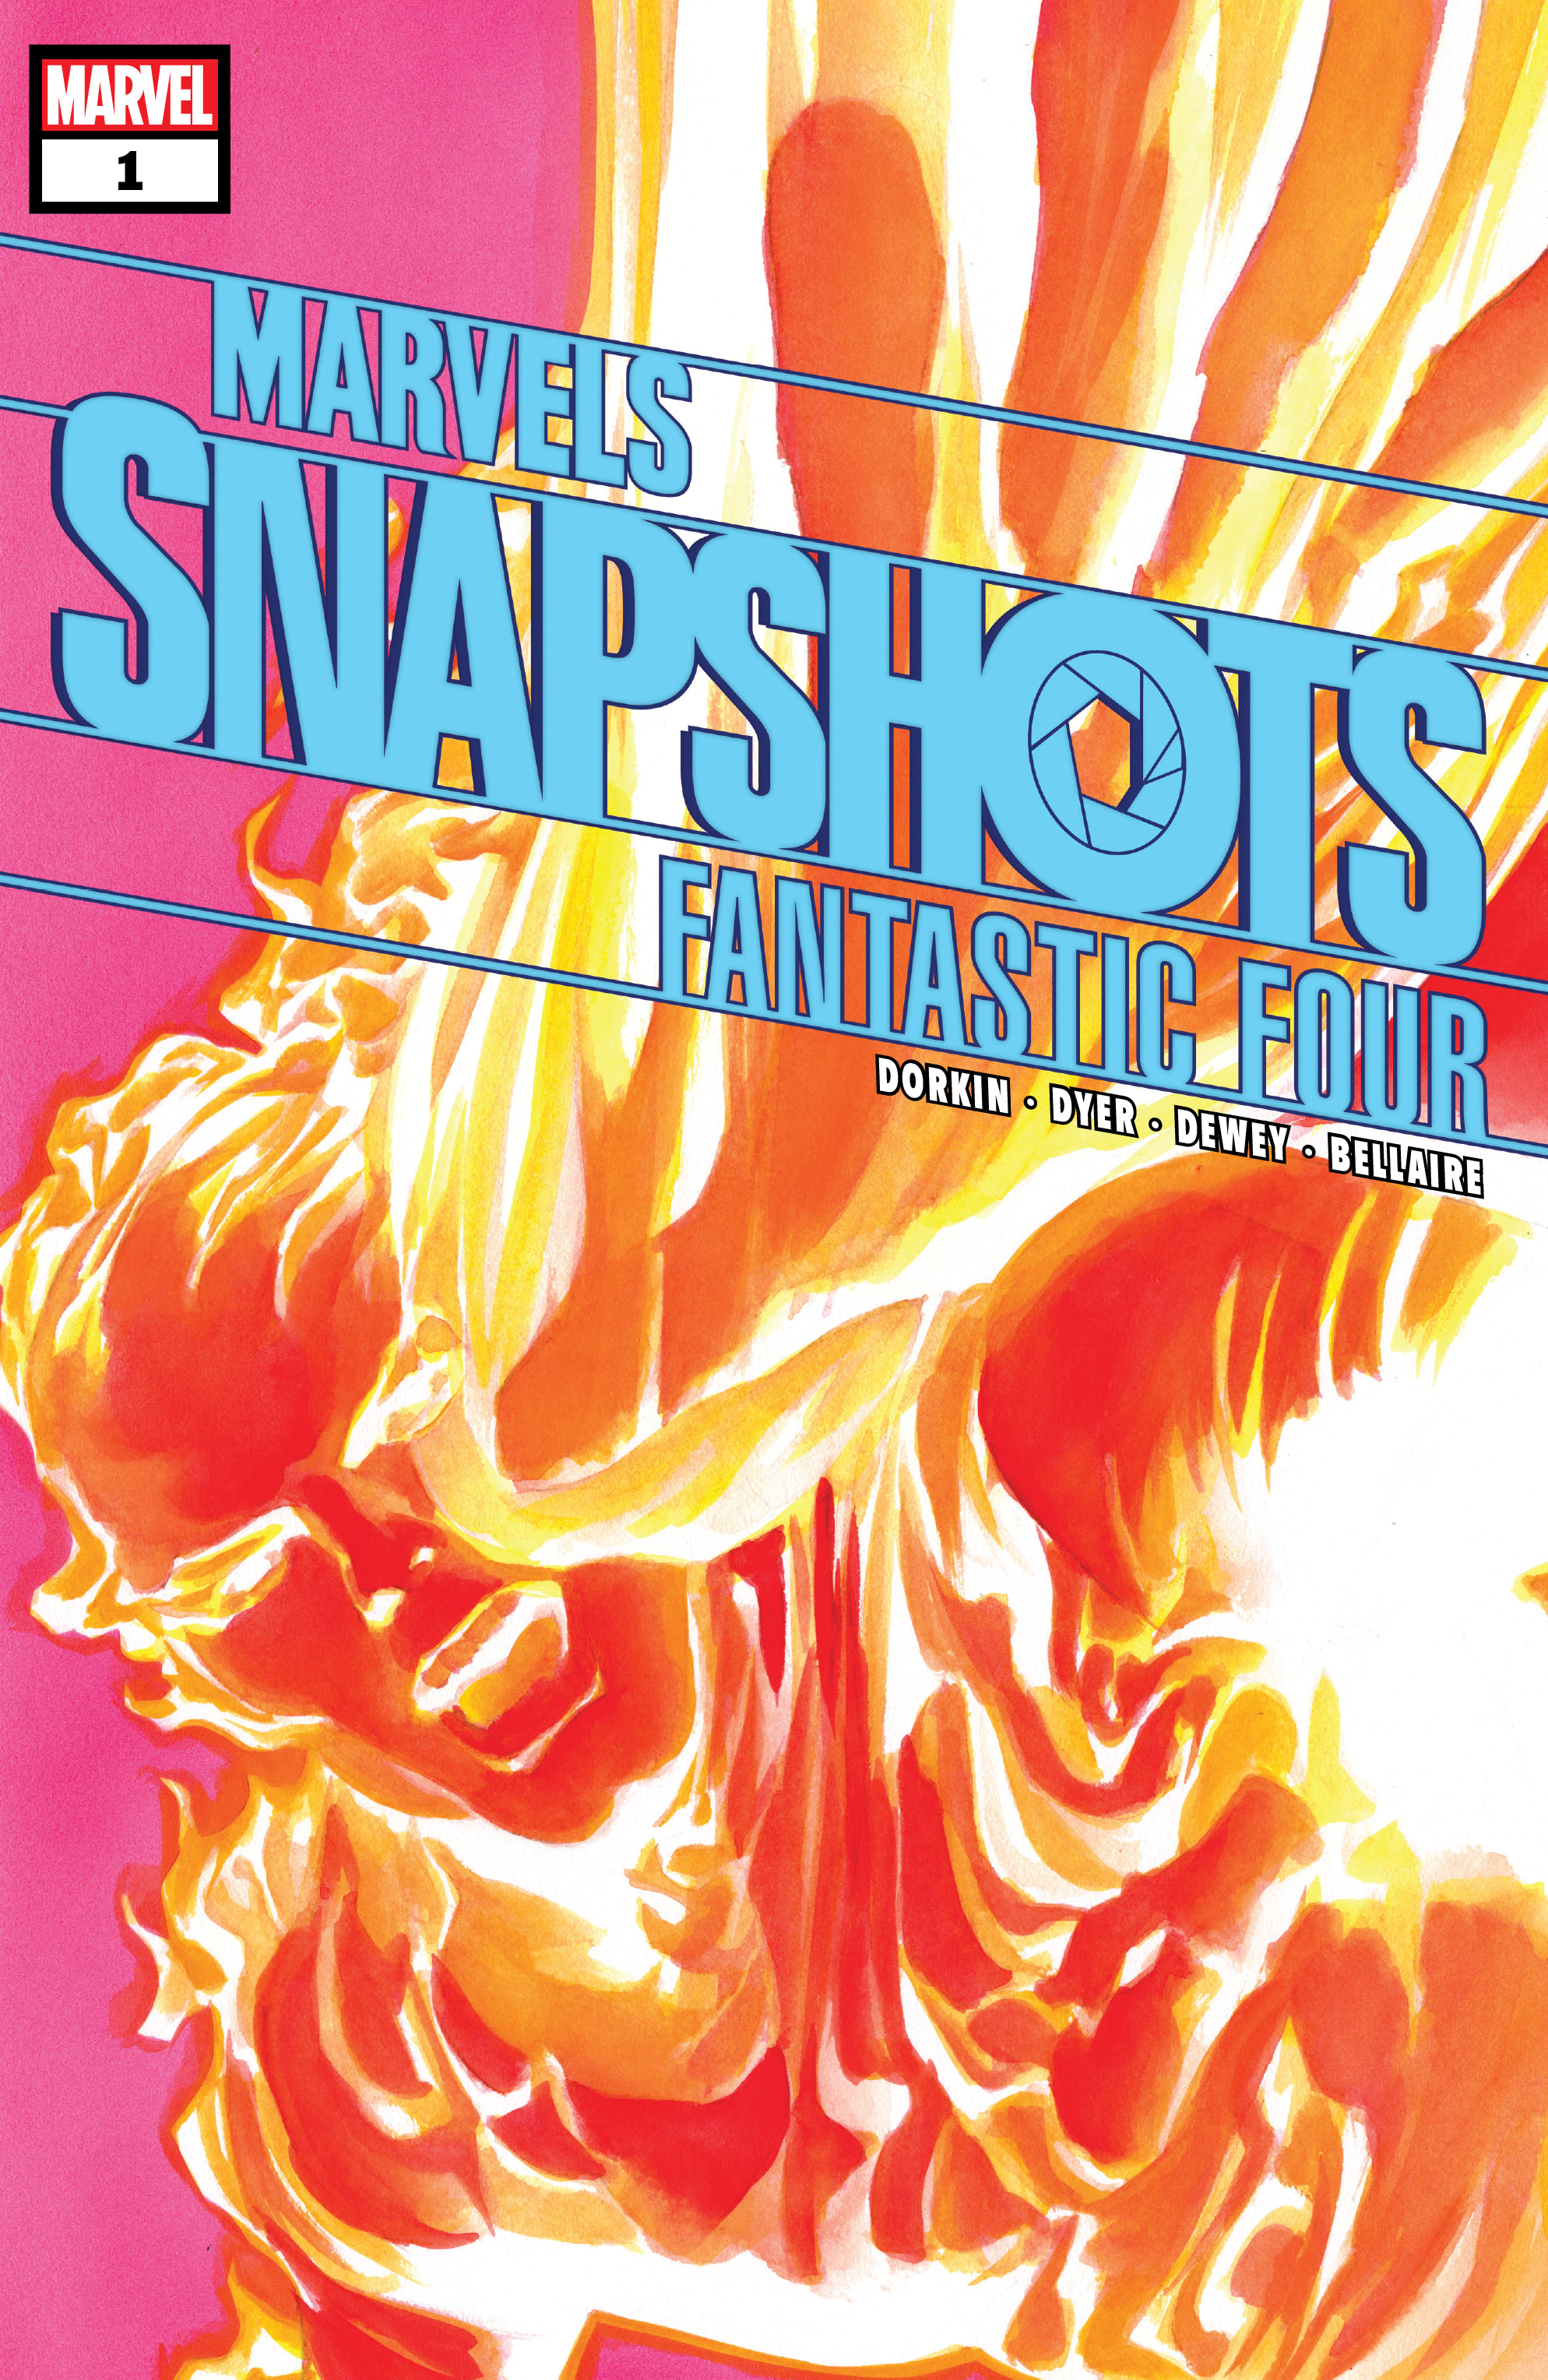 Read online Marvels Snapshot comic -  Issue # Fantastic Four - 1